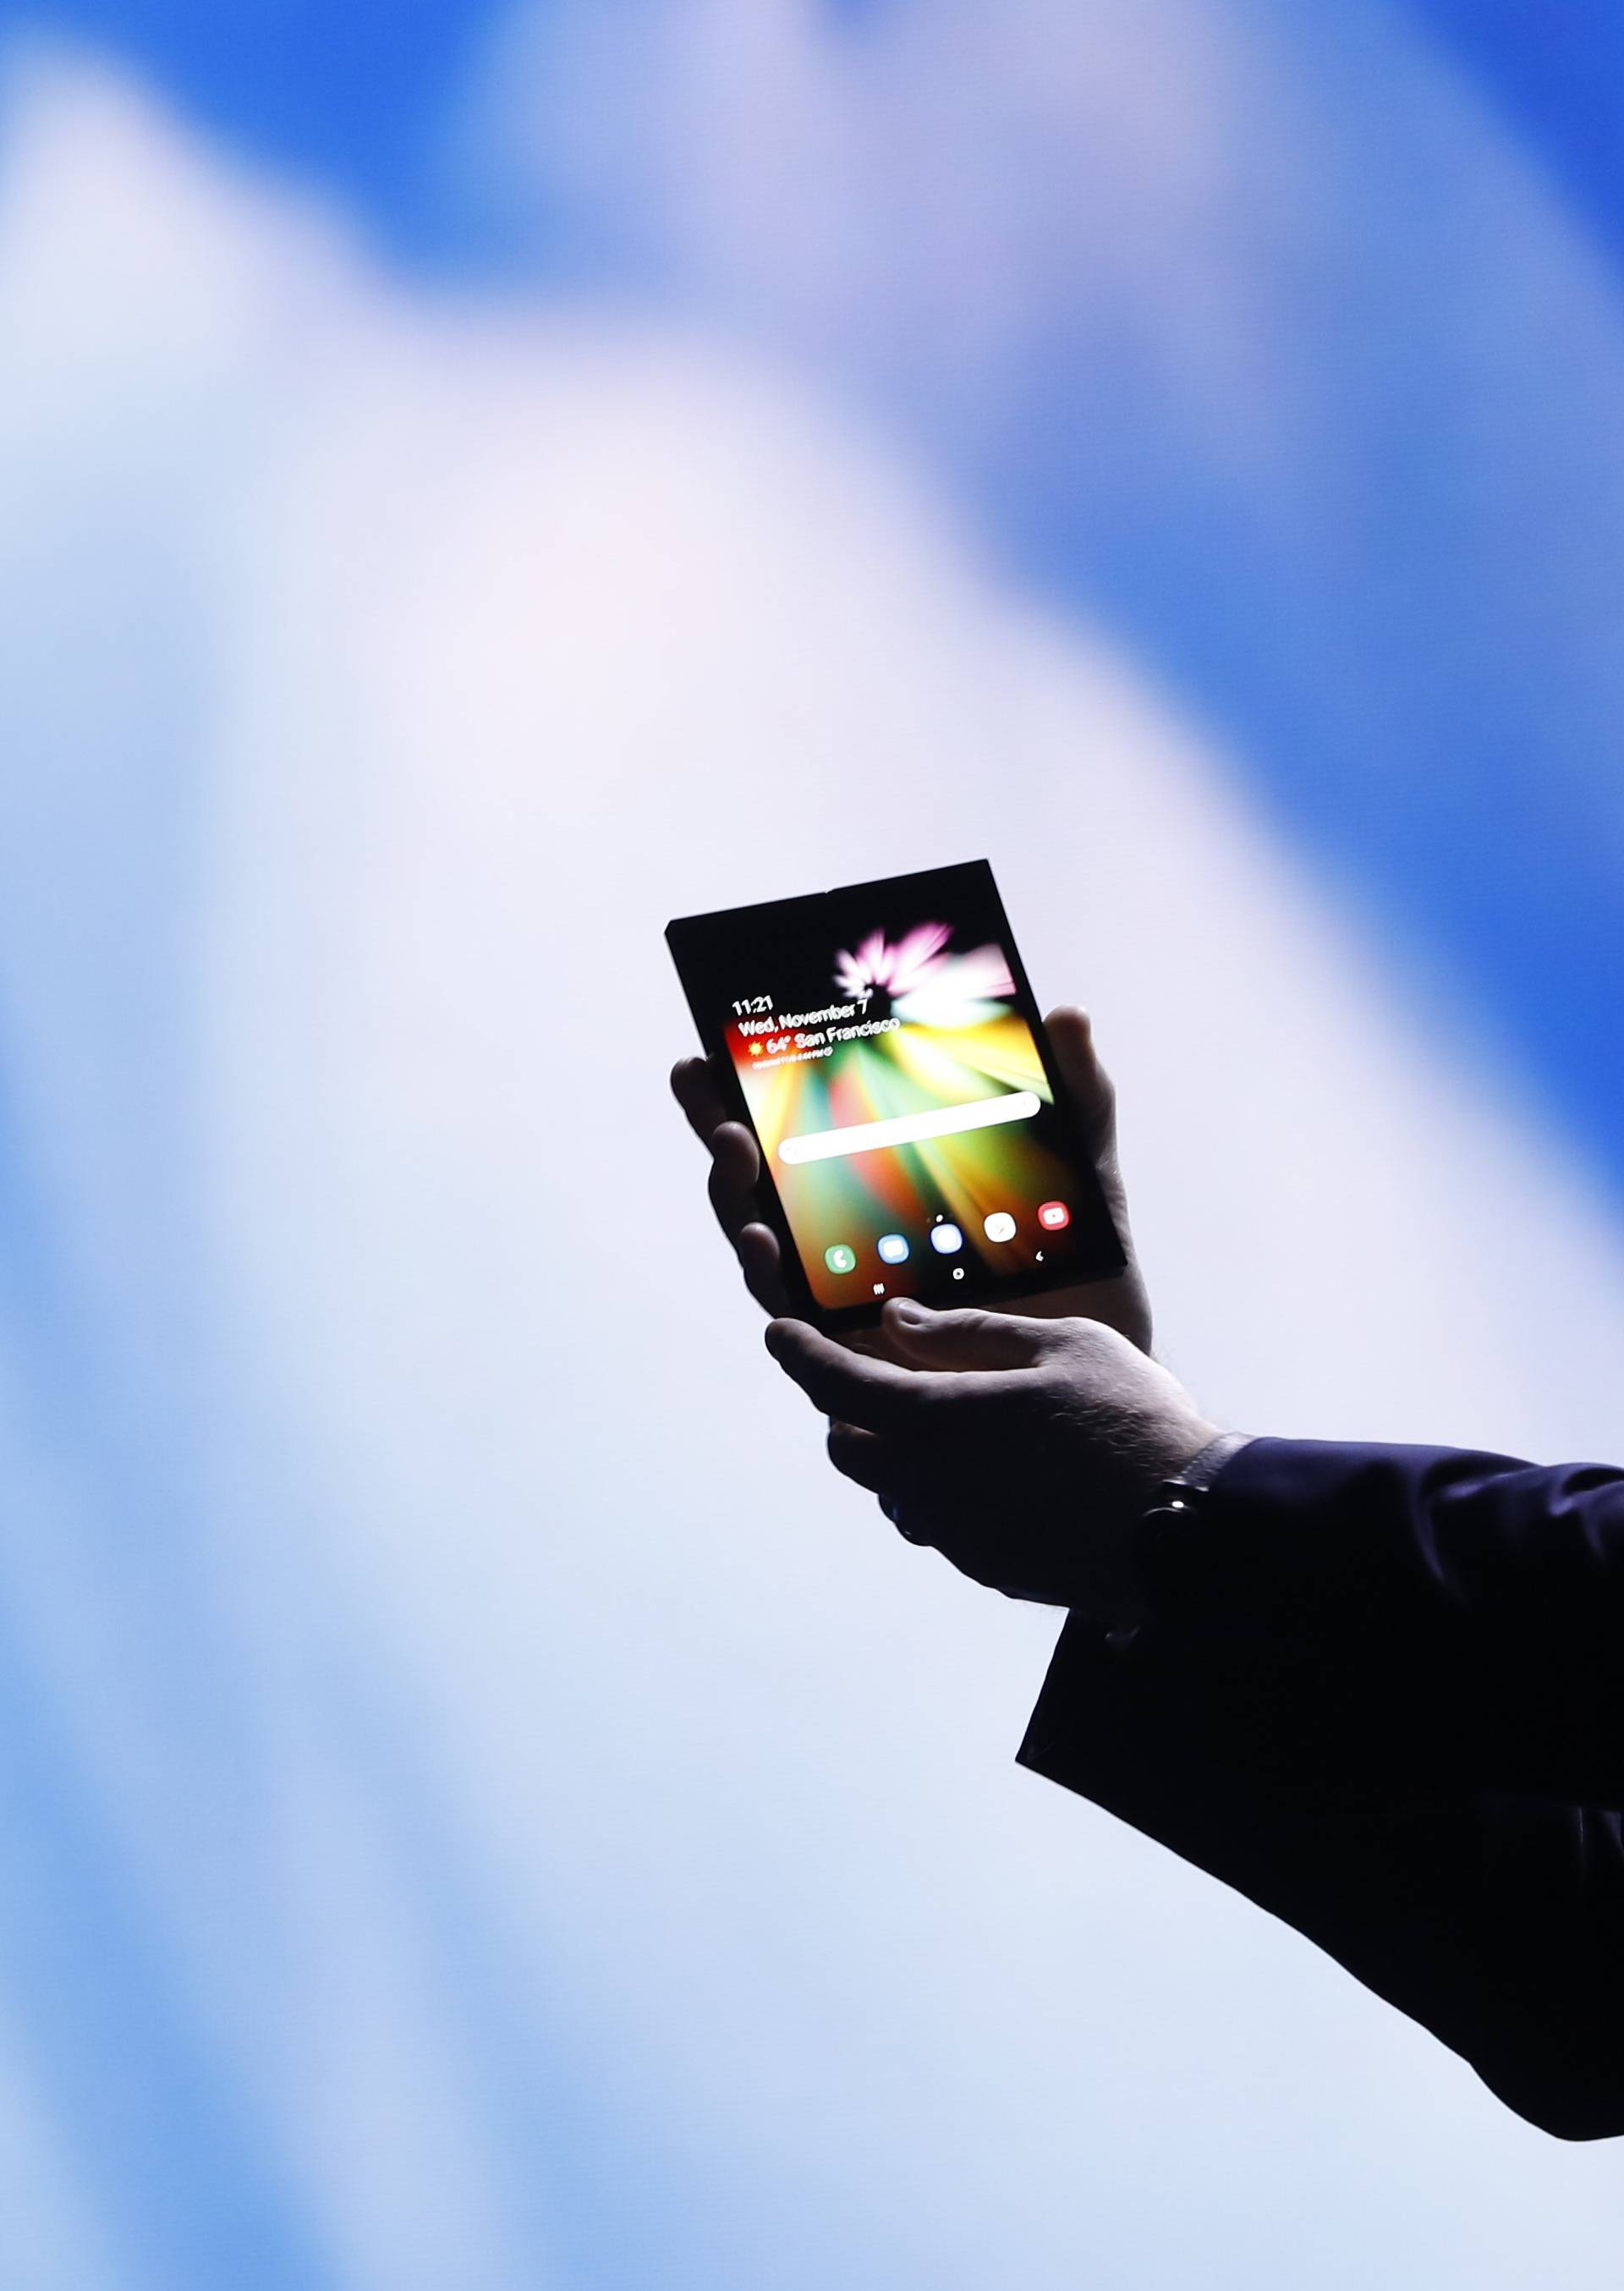 Justin Denison, Samsung Electronics senior vice president of Mobile Product Marketing, speaks during the unveiling of Samsung's new foldable screen smart phone, during the Samsung Developers Conference in San Francisco